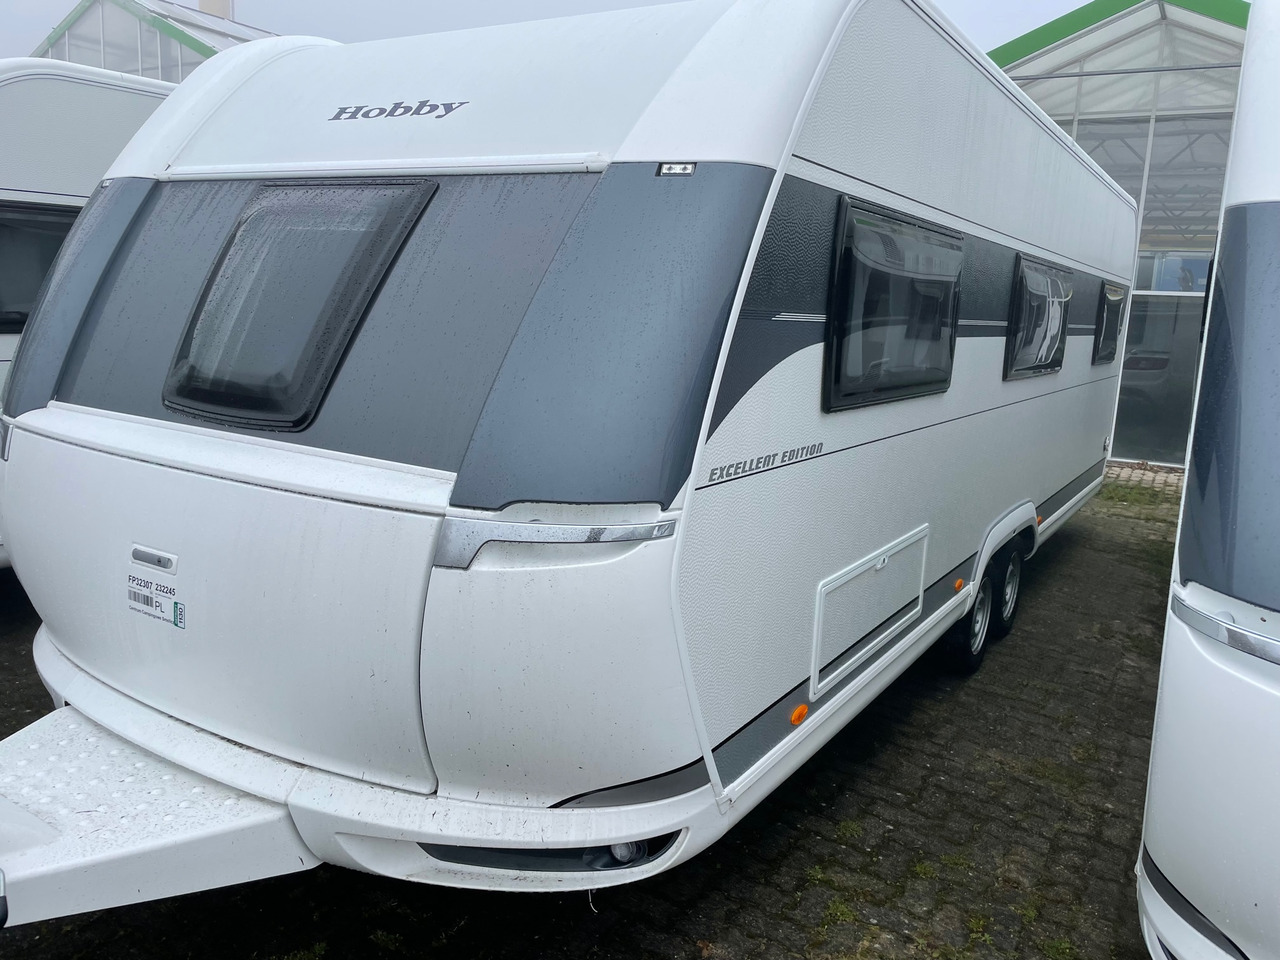 Leasing  HOBBY 650 UMFe EXCELLENT EDITION 2023 HOBBY 650 UMFe EXCELLENT EDITION 2023: kuva Leasing  HOBBY 650 UMFe EXCELLENT EDITION 2023 HOBBY 650 UMFe EXCELLENT EDITION 2023